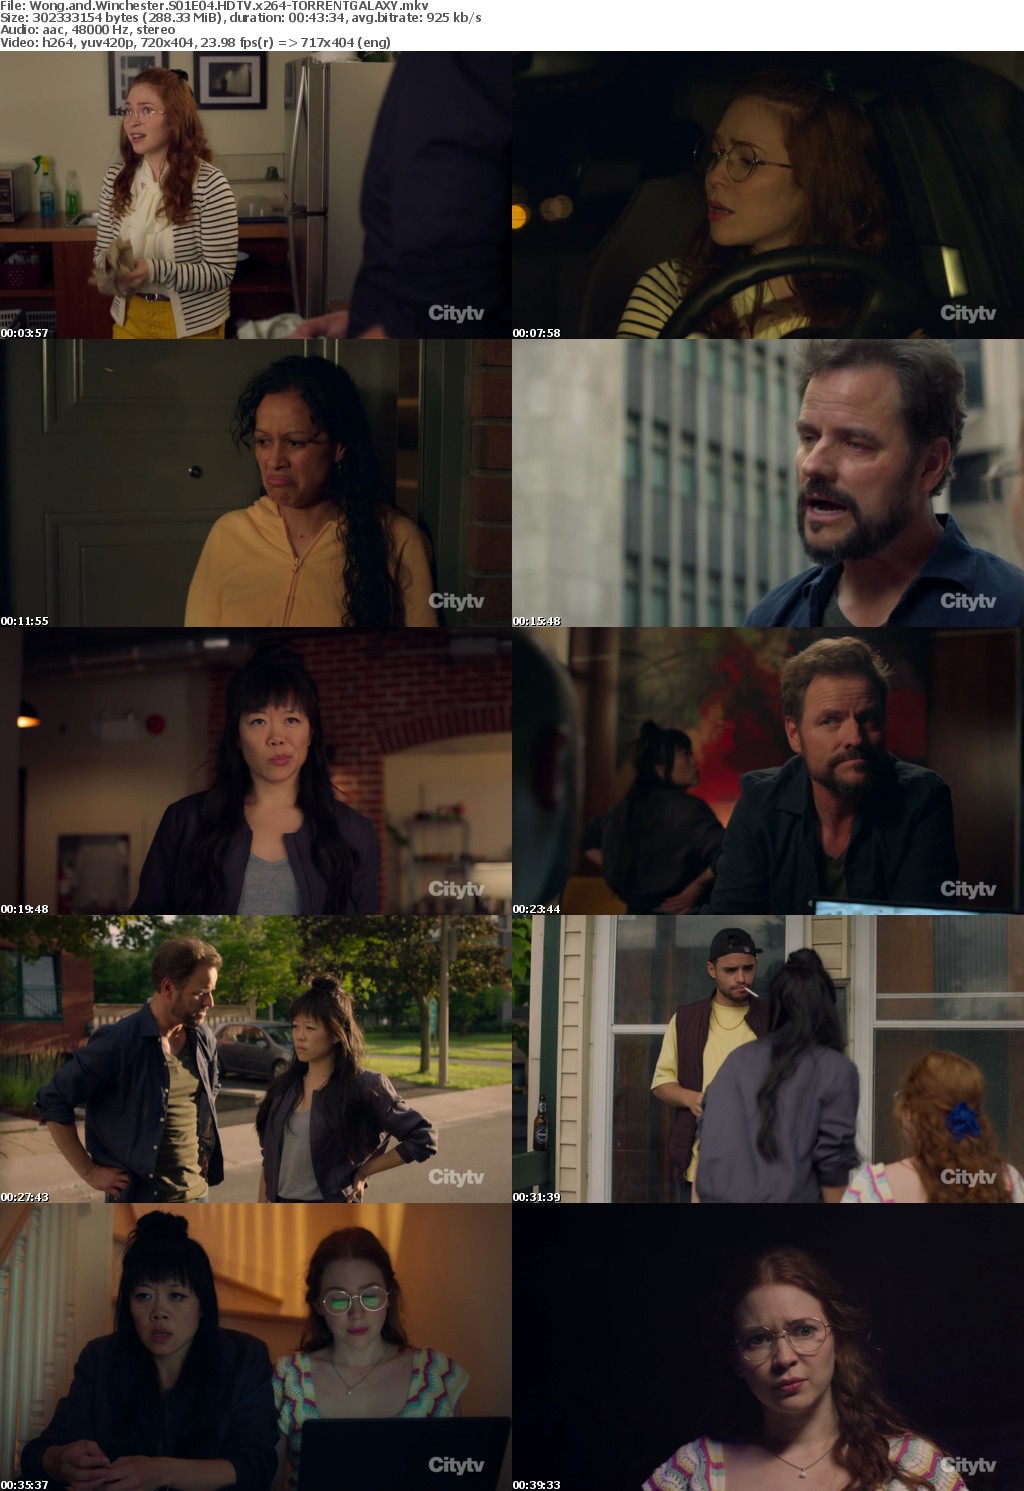 Wong and Winchester S01E04 HDTV x264-GALAXY